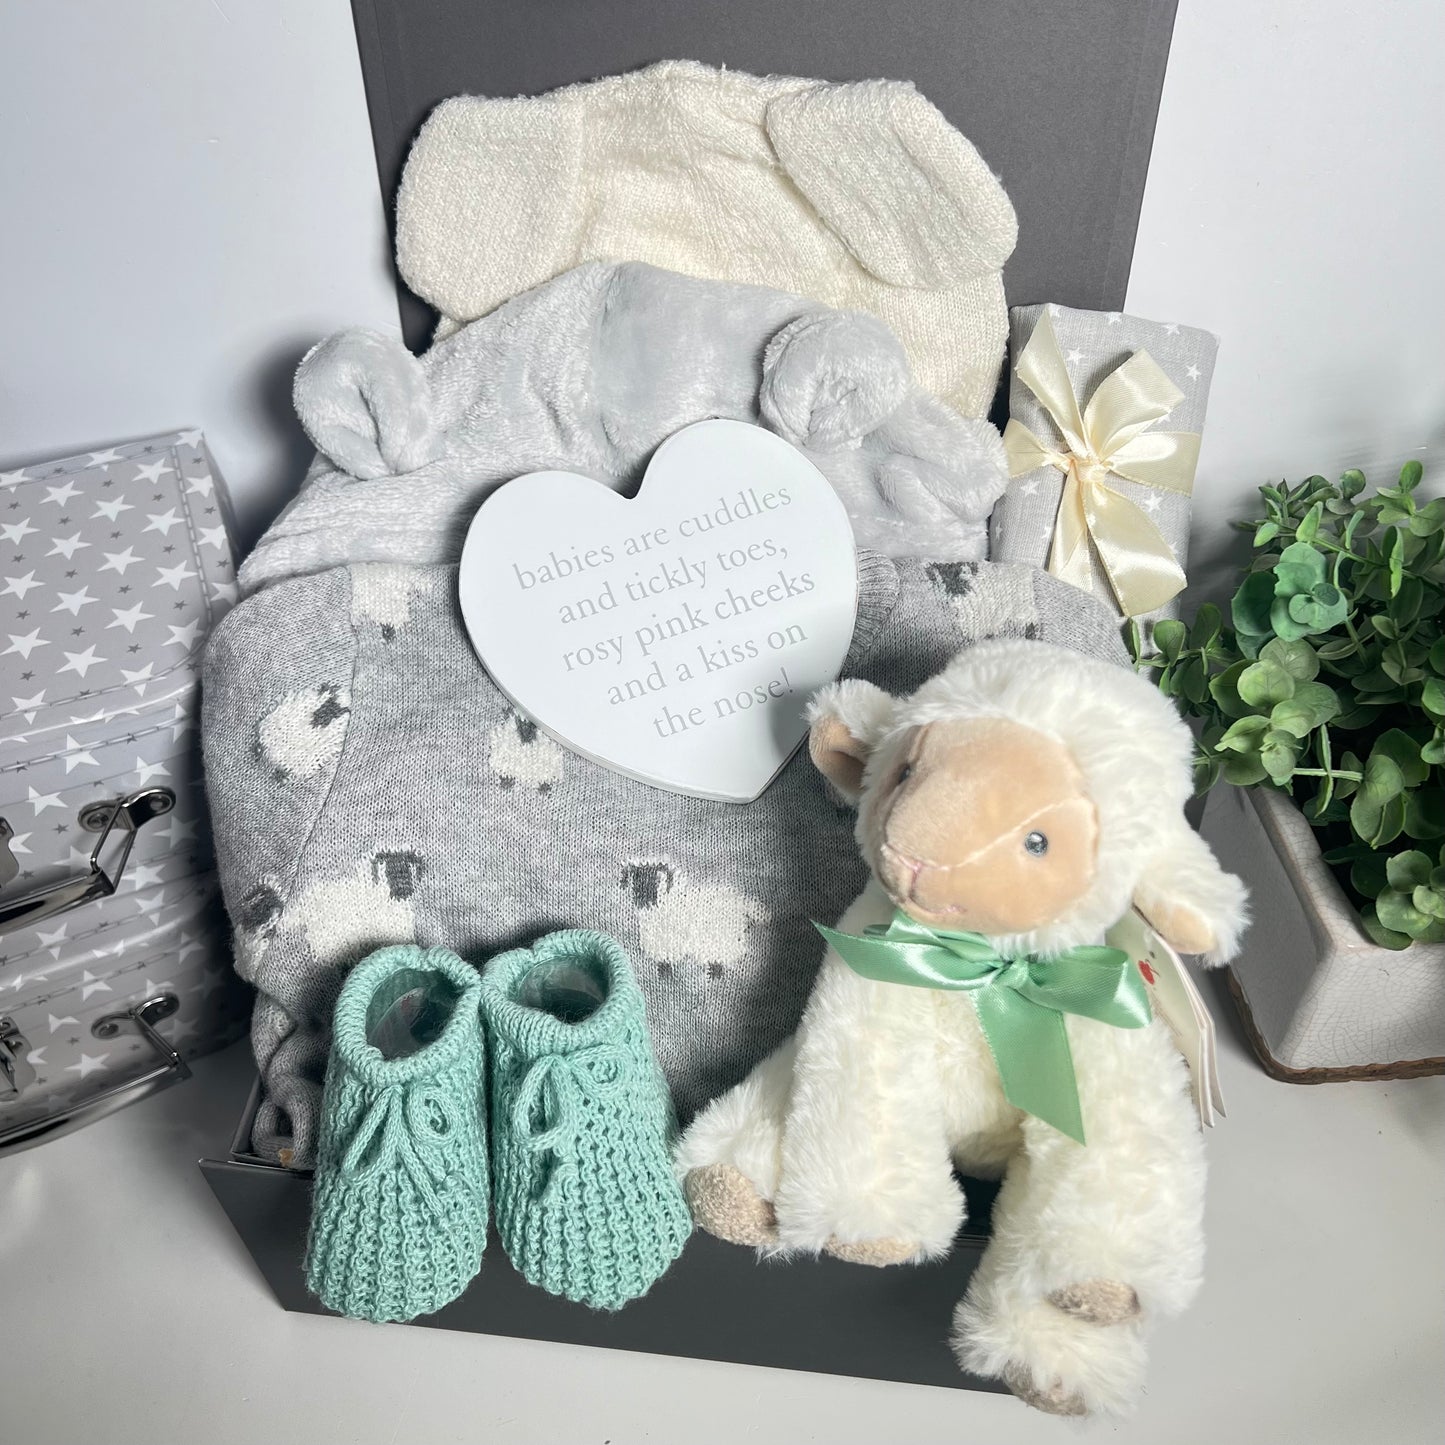 A lamb themed baby hamper in a grey magnetic baby keepsake box with a kniteed gret and white lamb patterned baby romper without feet and a matching lamb eared baby hat. A pair of sage coloured baby bootees, a white heart shaped nursery plaque a cuddly lamb baby toy, a grey and white muslin square a all in a grey magnetic baby keepsake box